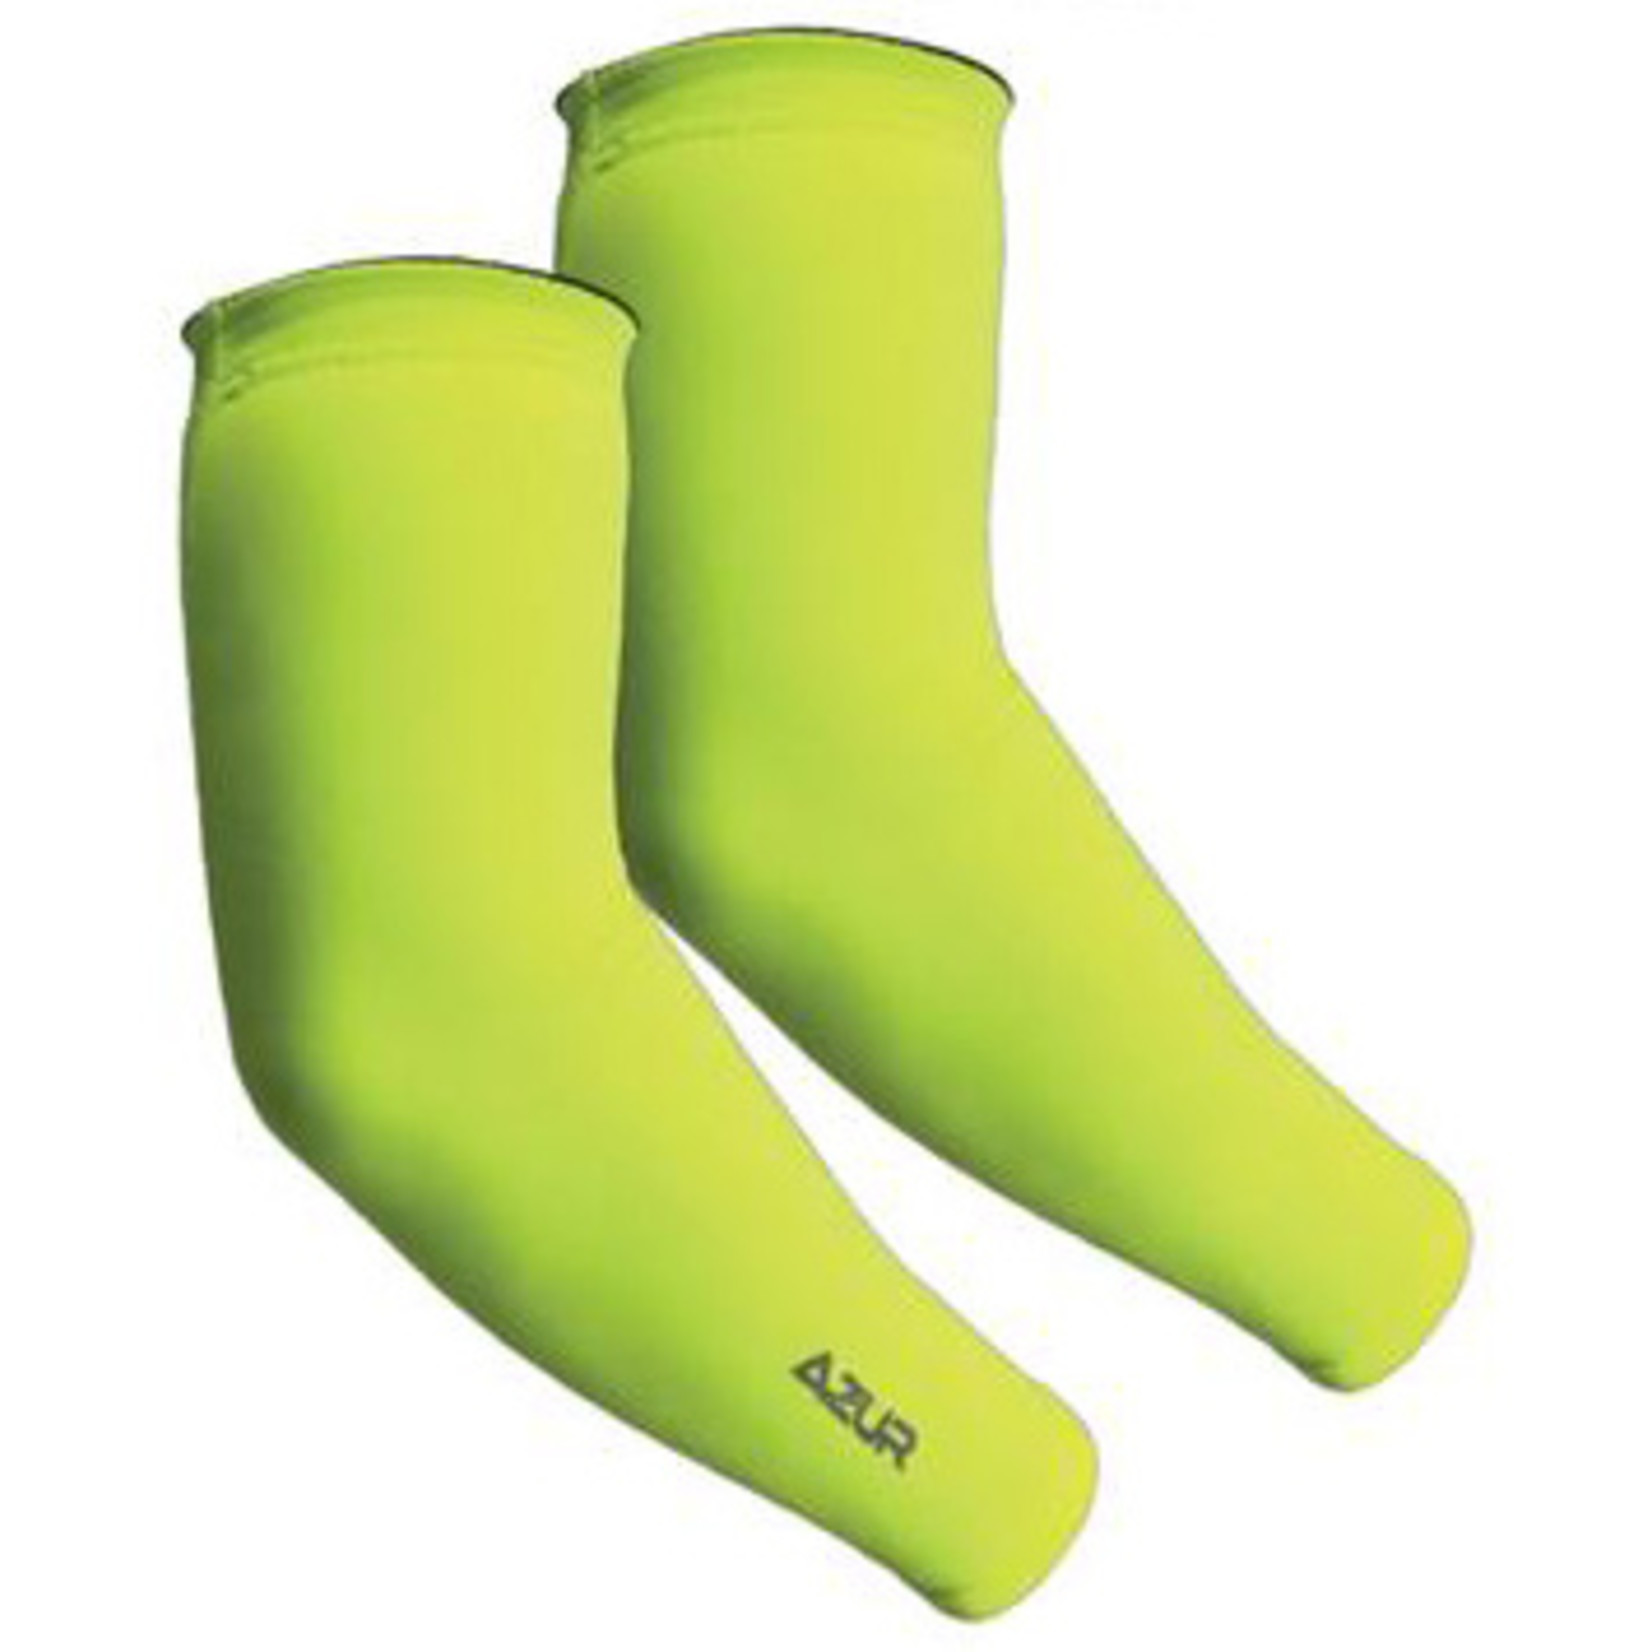 Azur Azur Arm Warmers Neon Styled To Fit Comfortably - Small - "Special"